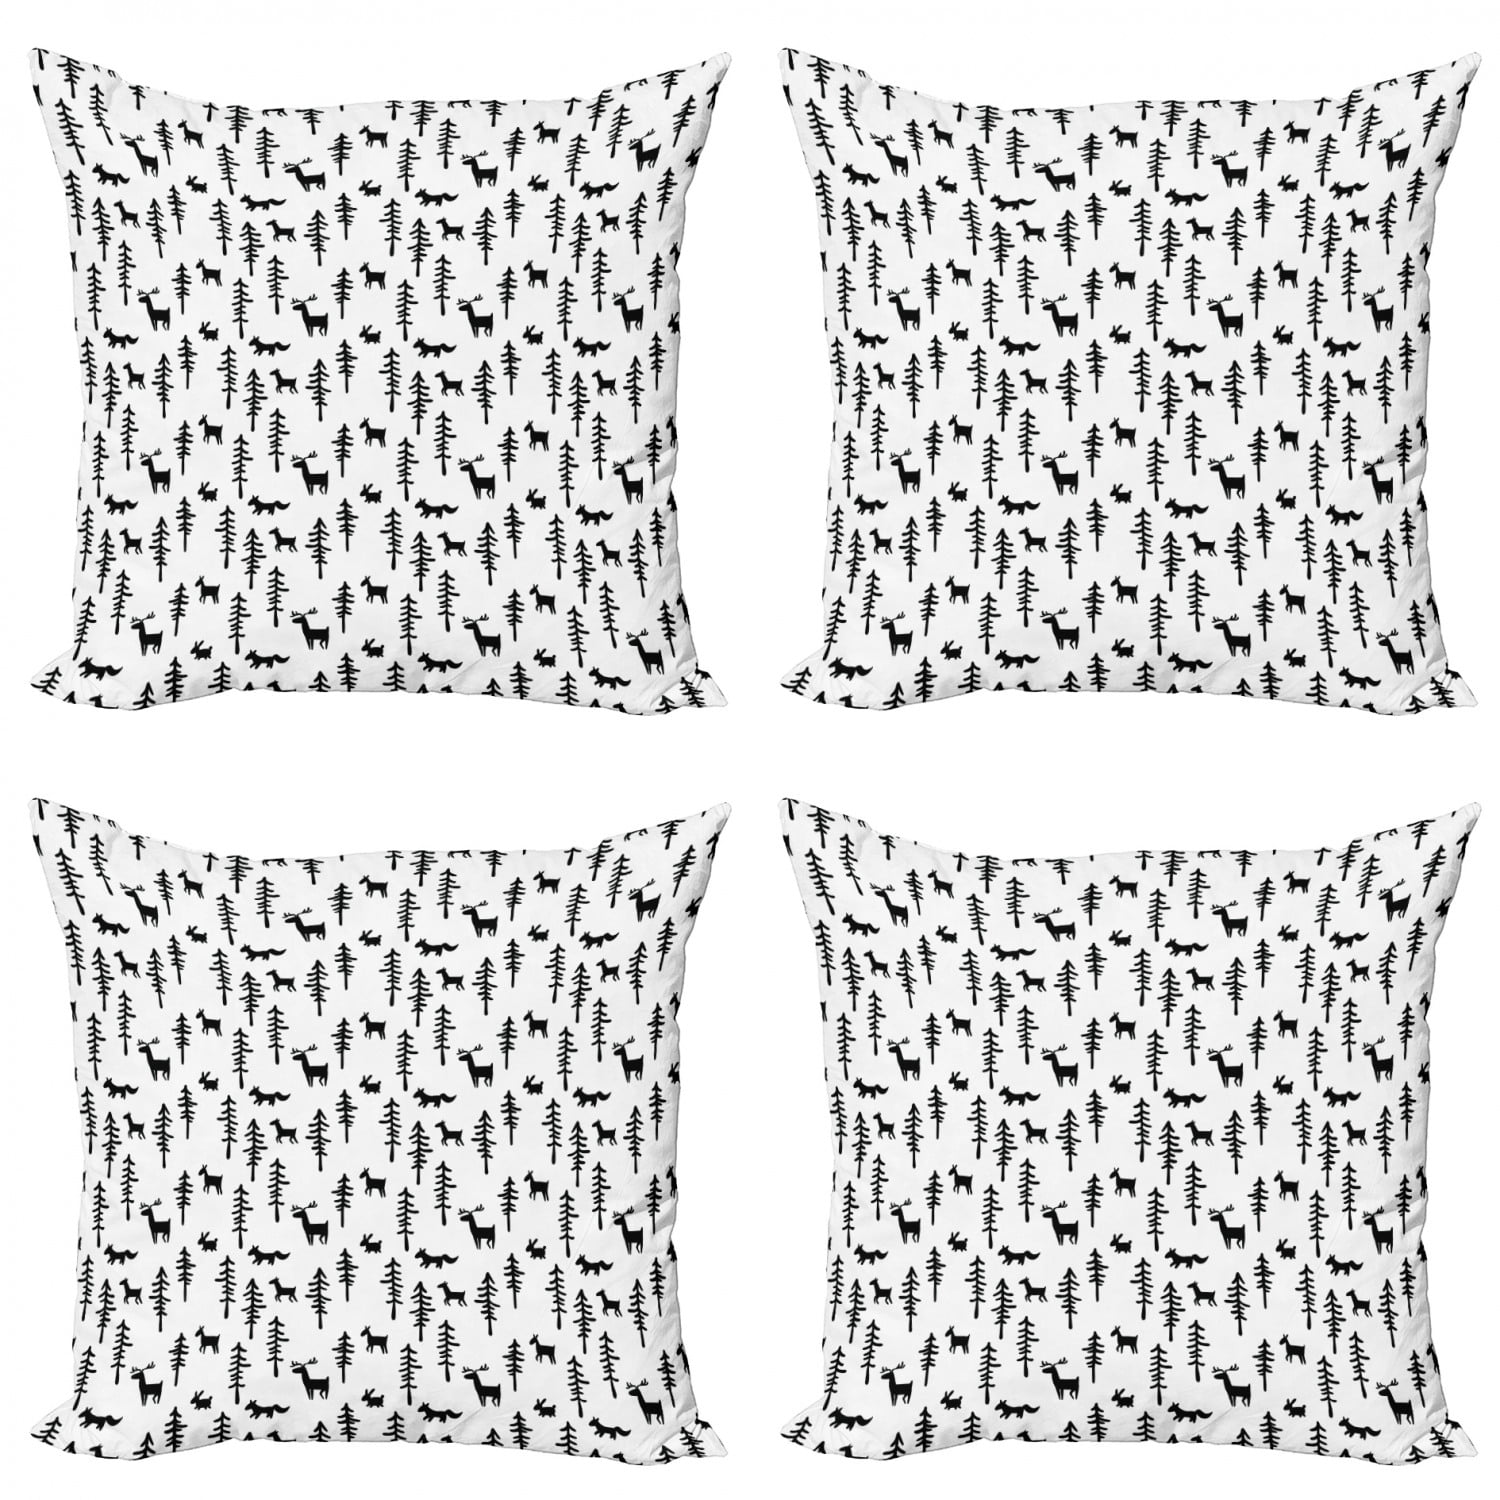 Forest Throw Pillow Cushion Case Pack of 4, Christmas Spirit Inspired Sketchy Reindeer Pine Trees Rabbits Animal Design, Modern Accent Double-Sided Print, 4 Sizes, Black White, by Ambesonne